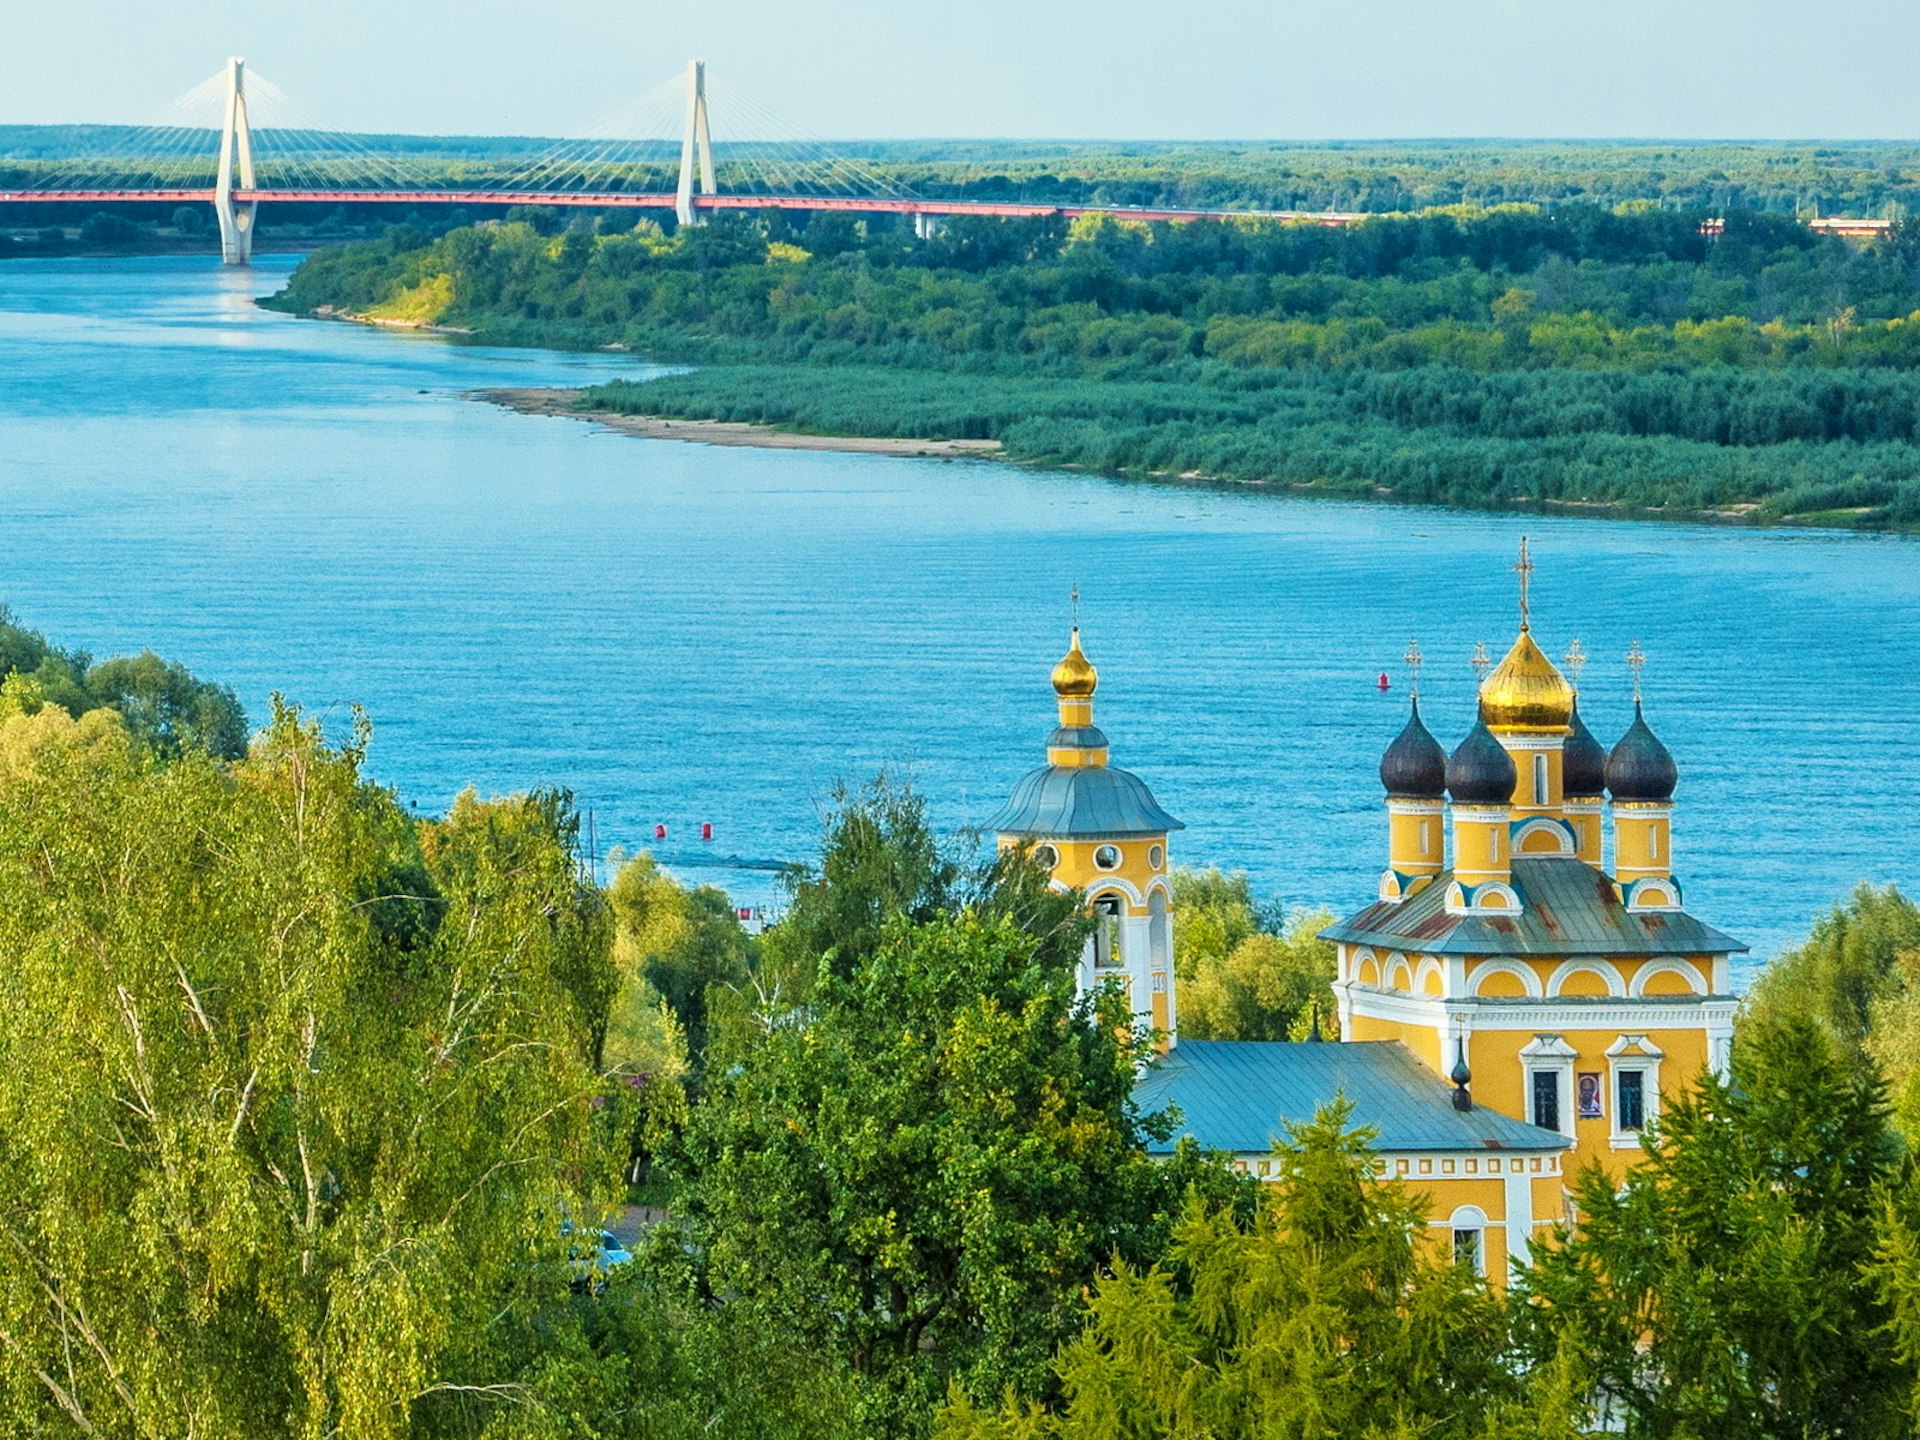 A church in the ancient Russian city of Murom on the bank of the Oka river © Dance60 / Shutterstock